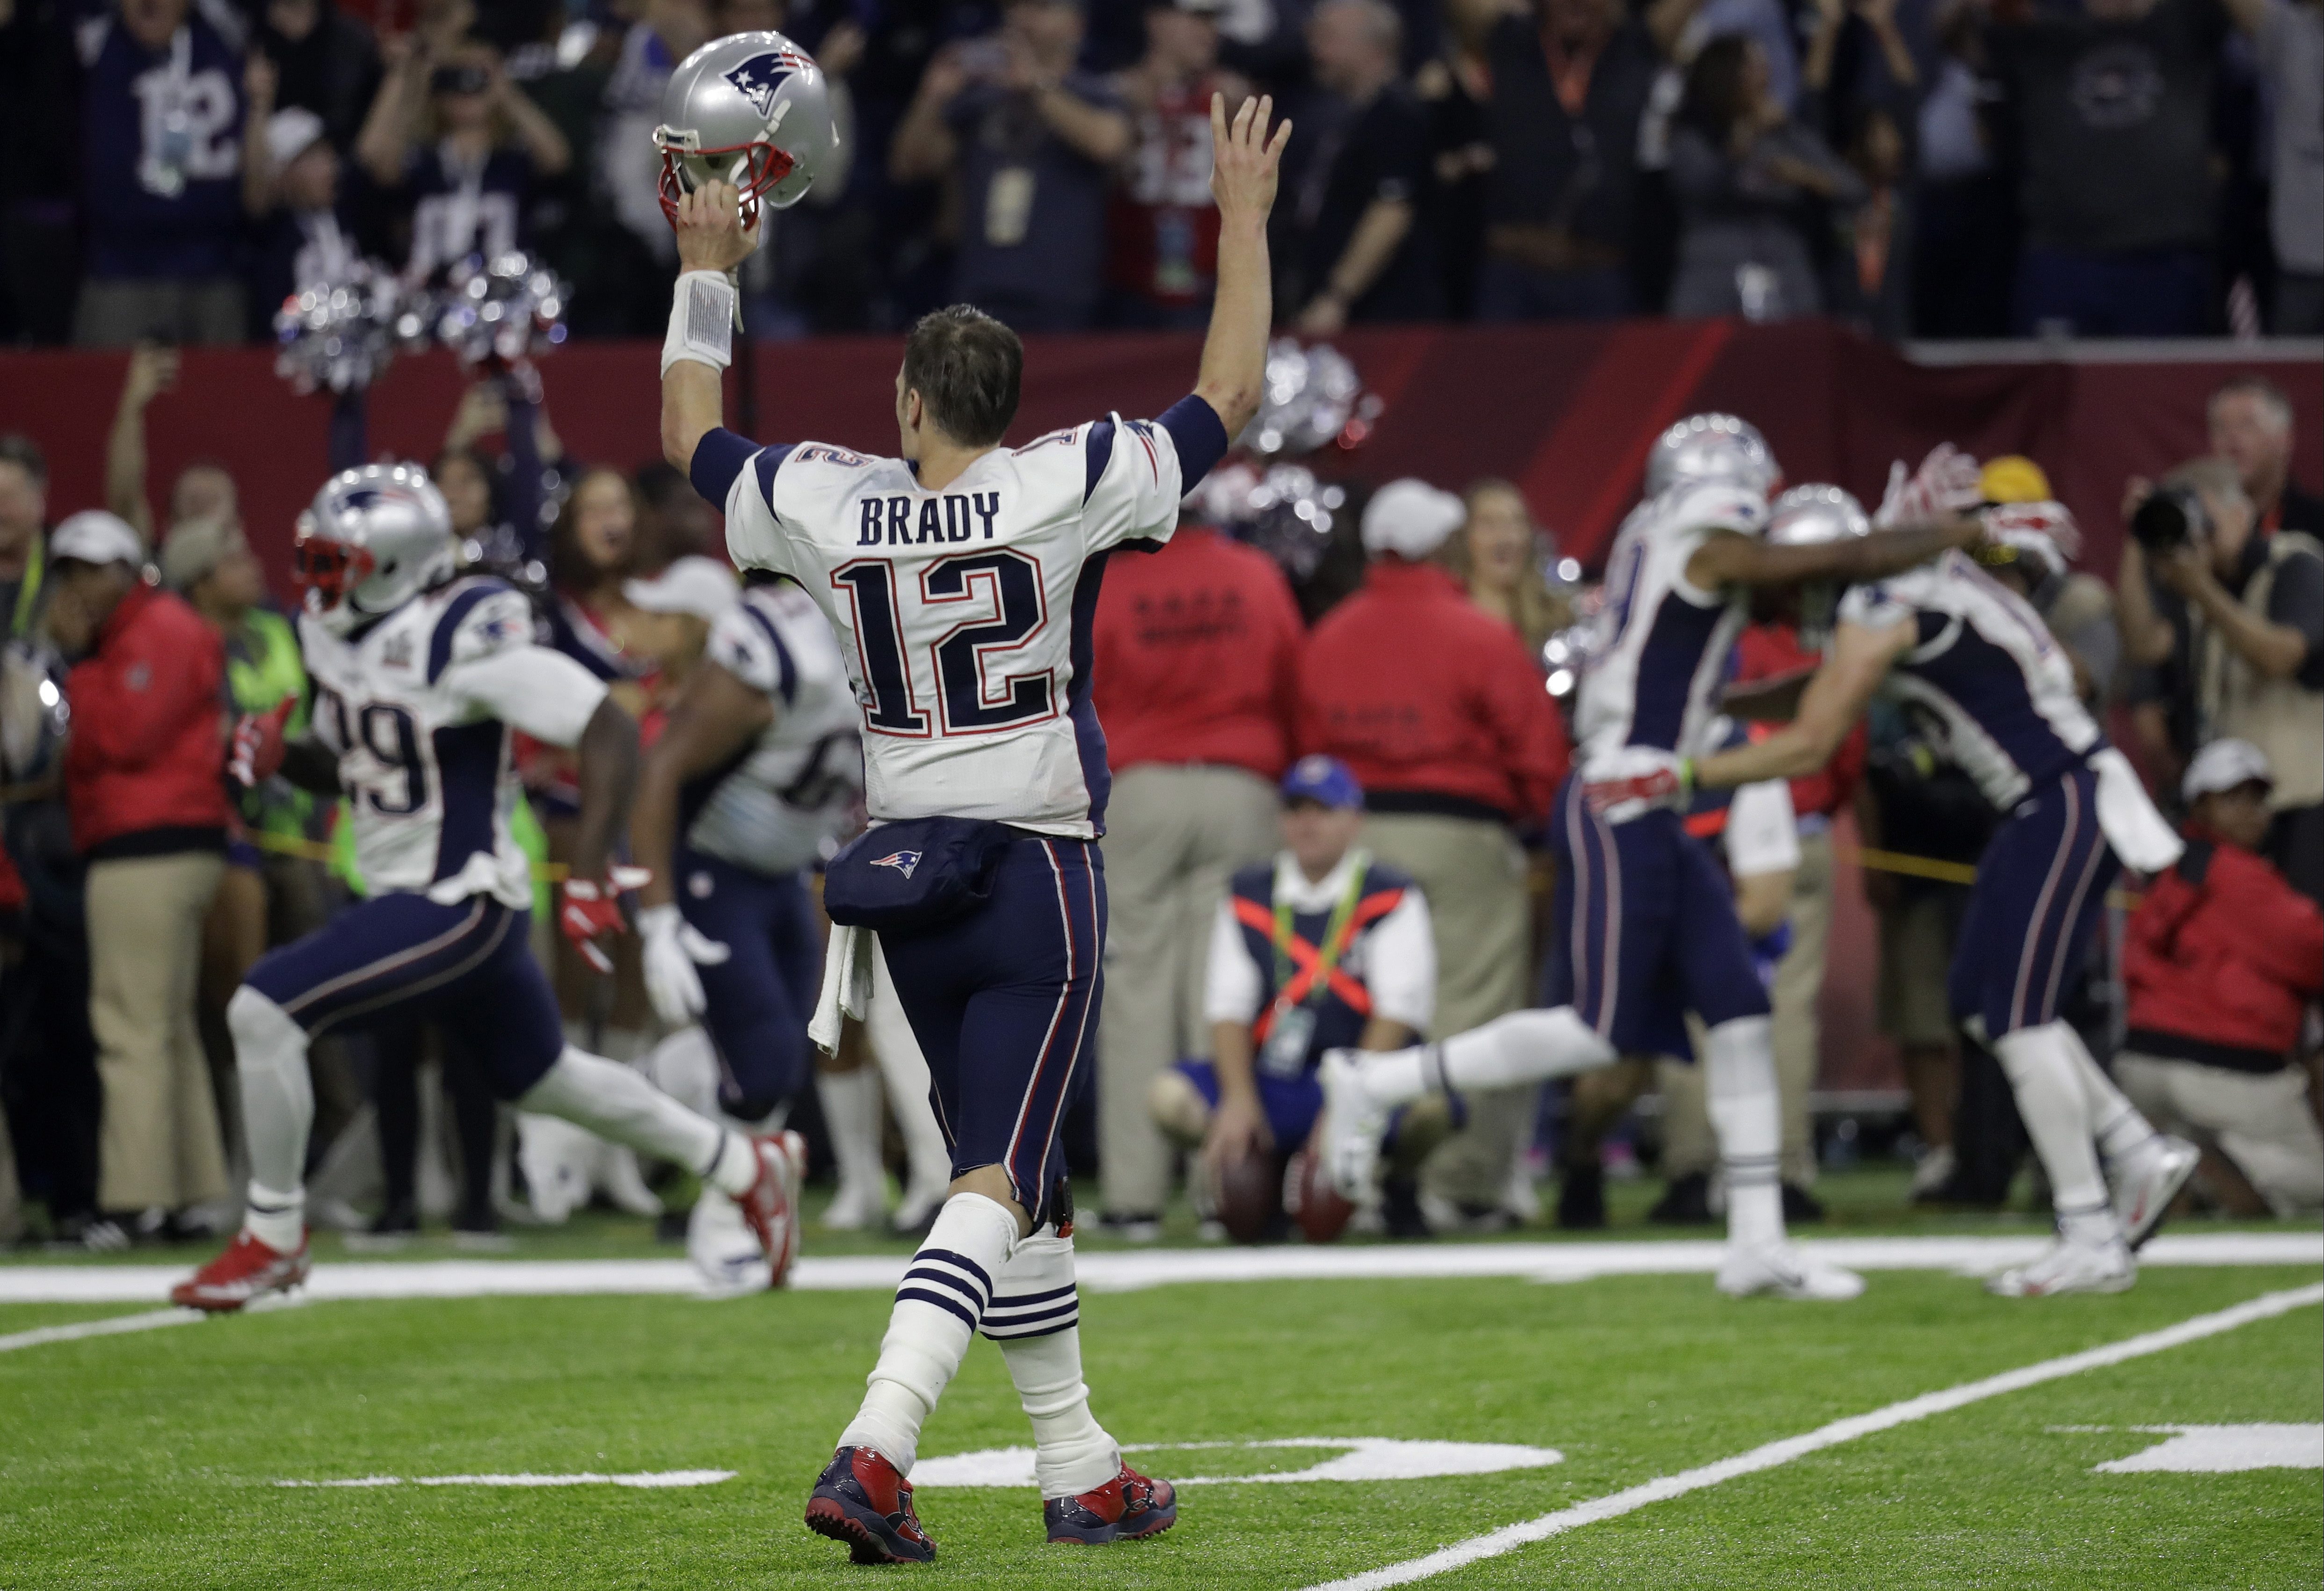 New England Patriots' Tom Brady reacts after winning the NFL Super Bowl LI against the Atlanta Falcons in overtime. The Patriots won 34-28. (AP Photo)